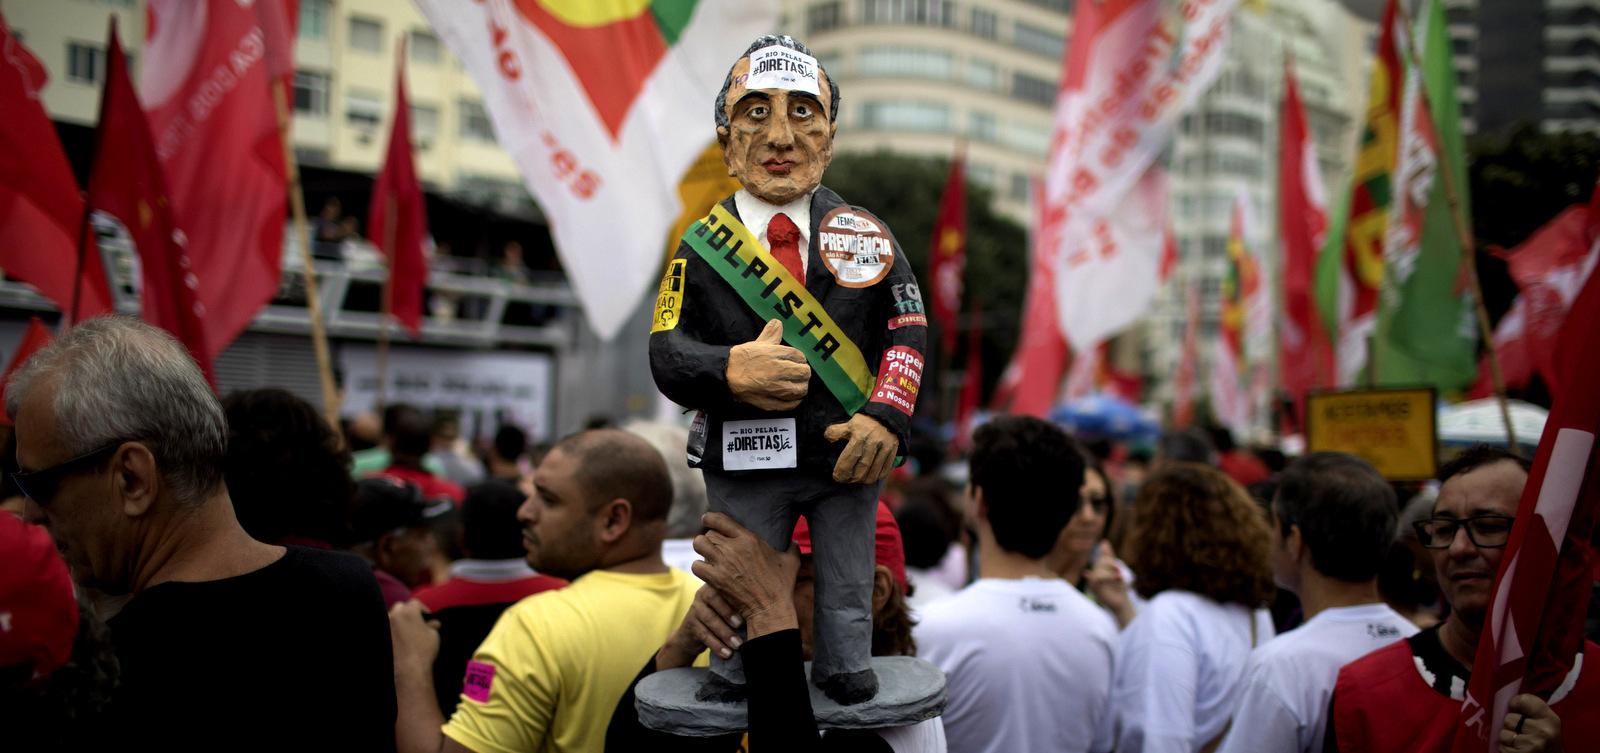 A demonstrator carries a statue in the likeness of Brazil's president Michel Temer during a protest against Brazil's president Michel Temer at Copacabana beach in Rio de Janeiro, Brazil, May 28, 2017. People gathered on Copacabana beach ahead of a concert by Brazilian musical performers calling for new presidential elections while pressure mounts on the country's leader to resign amid corruption allegations. (AP/Leo Correa)